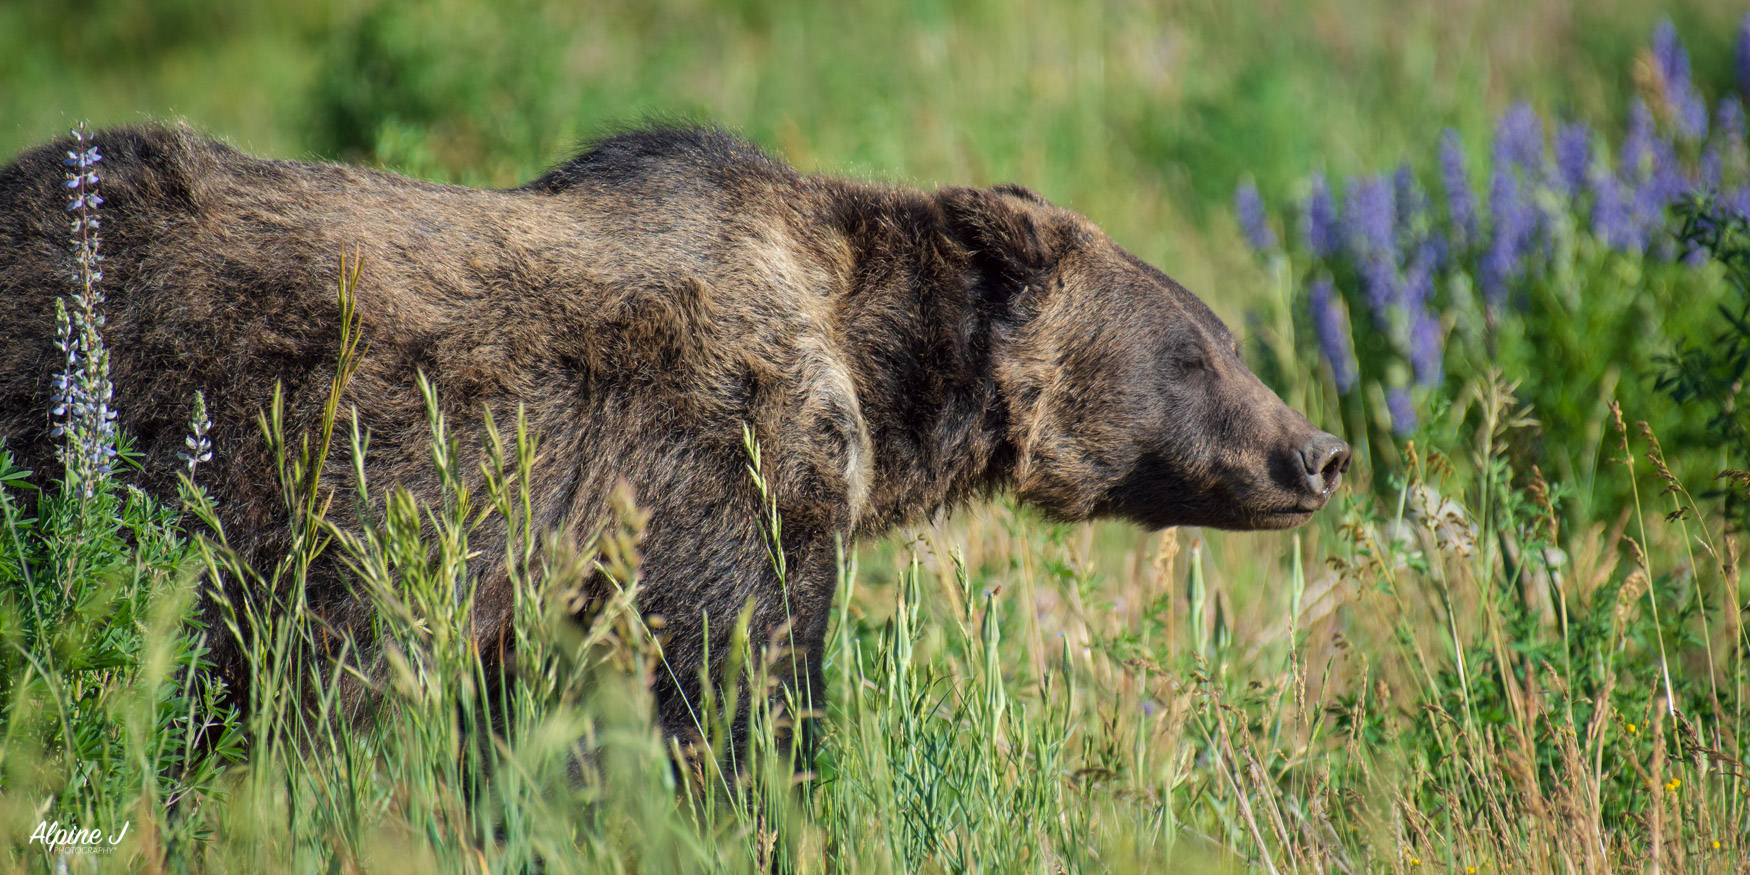 Grizzly bear in Wyoming.